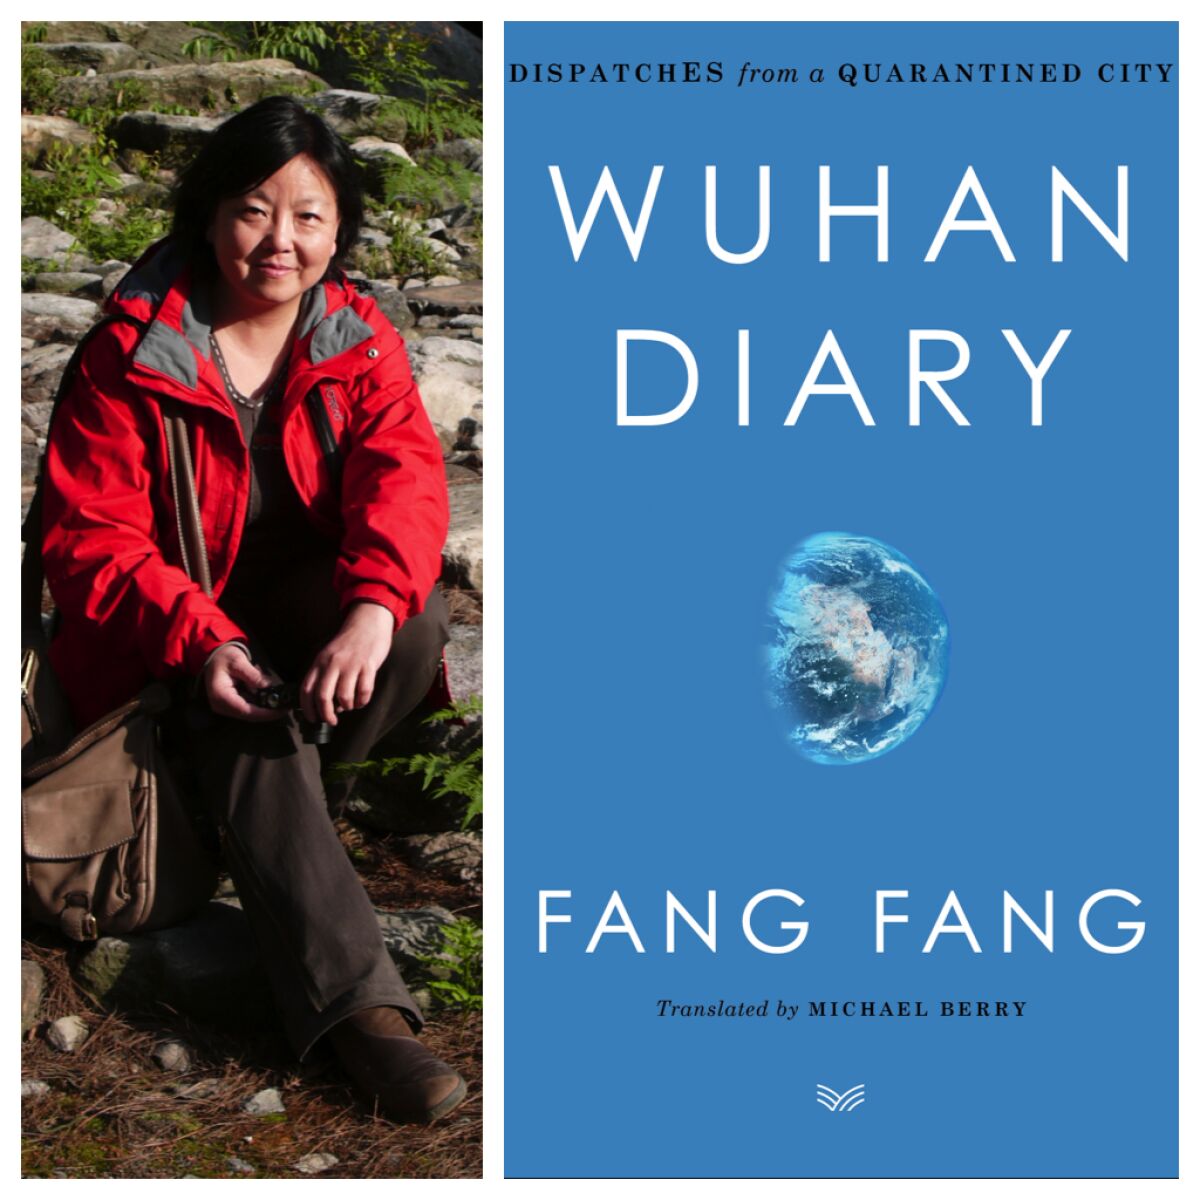 Fang Fang, author of "Wuhan Diary: Dispatches from a Quarantined City."